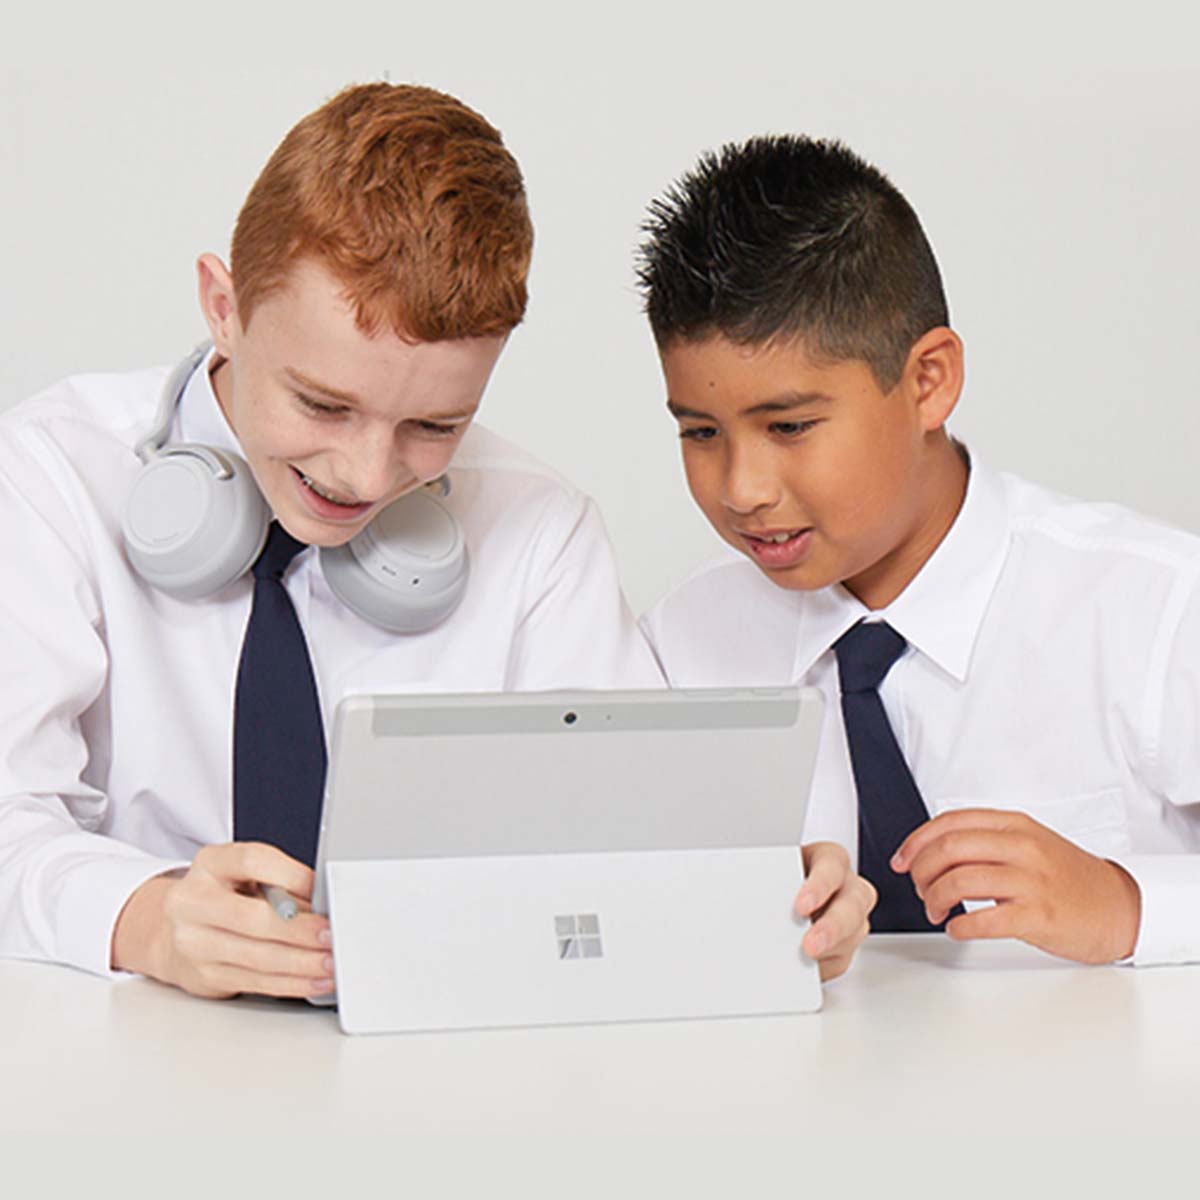 Increasing Teacher productivity with M365 + Surface